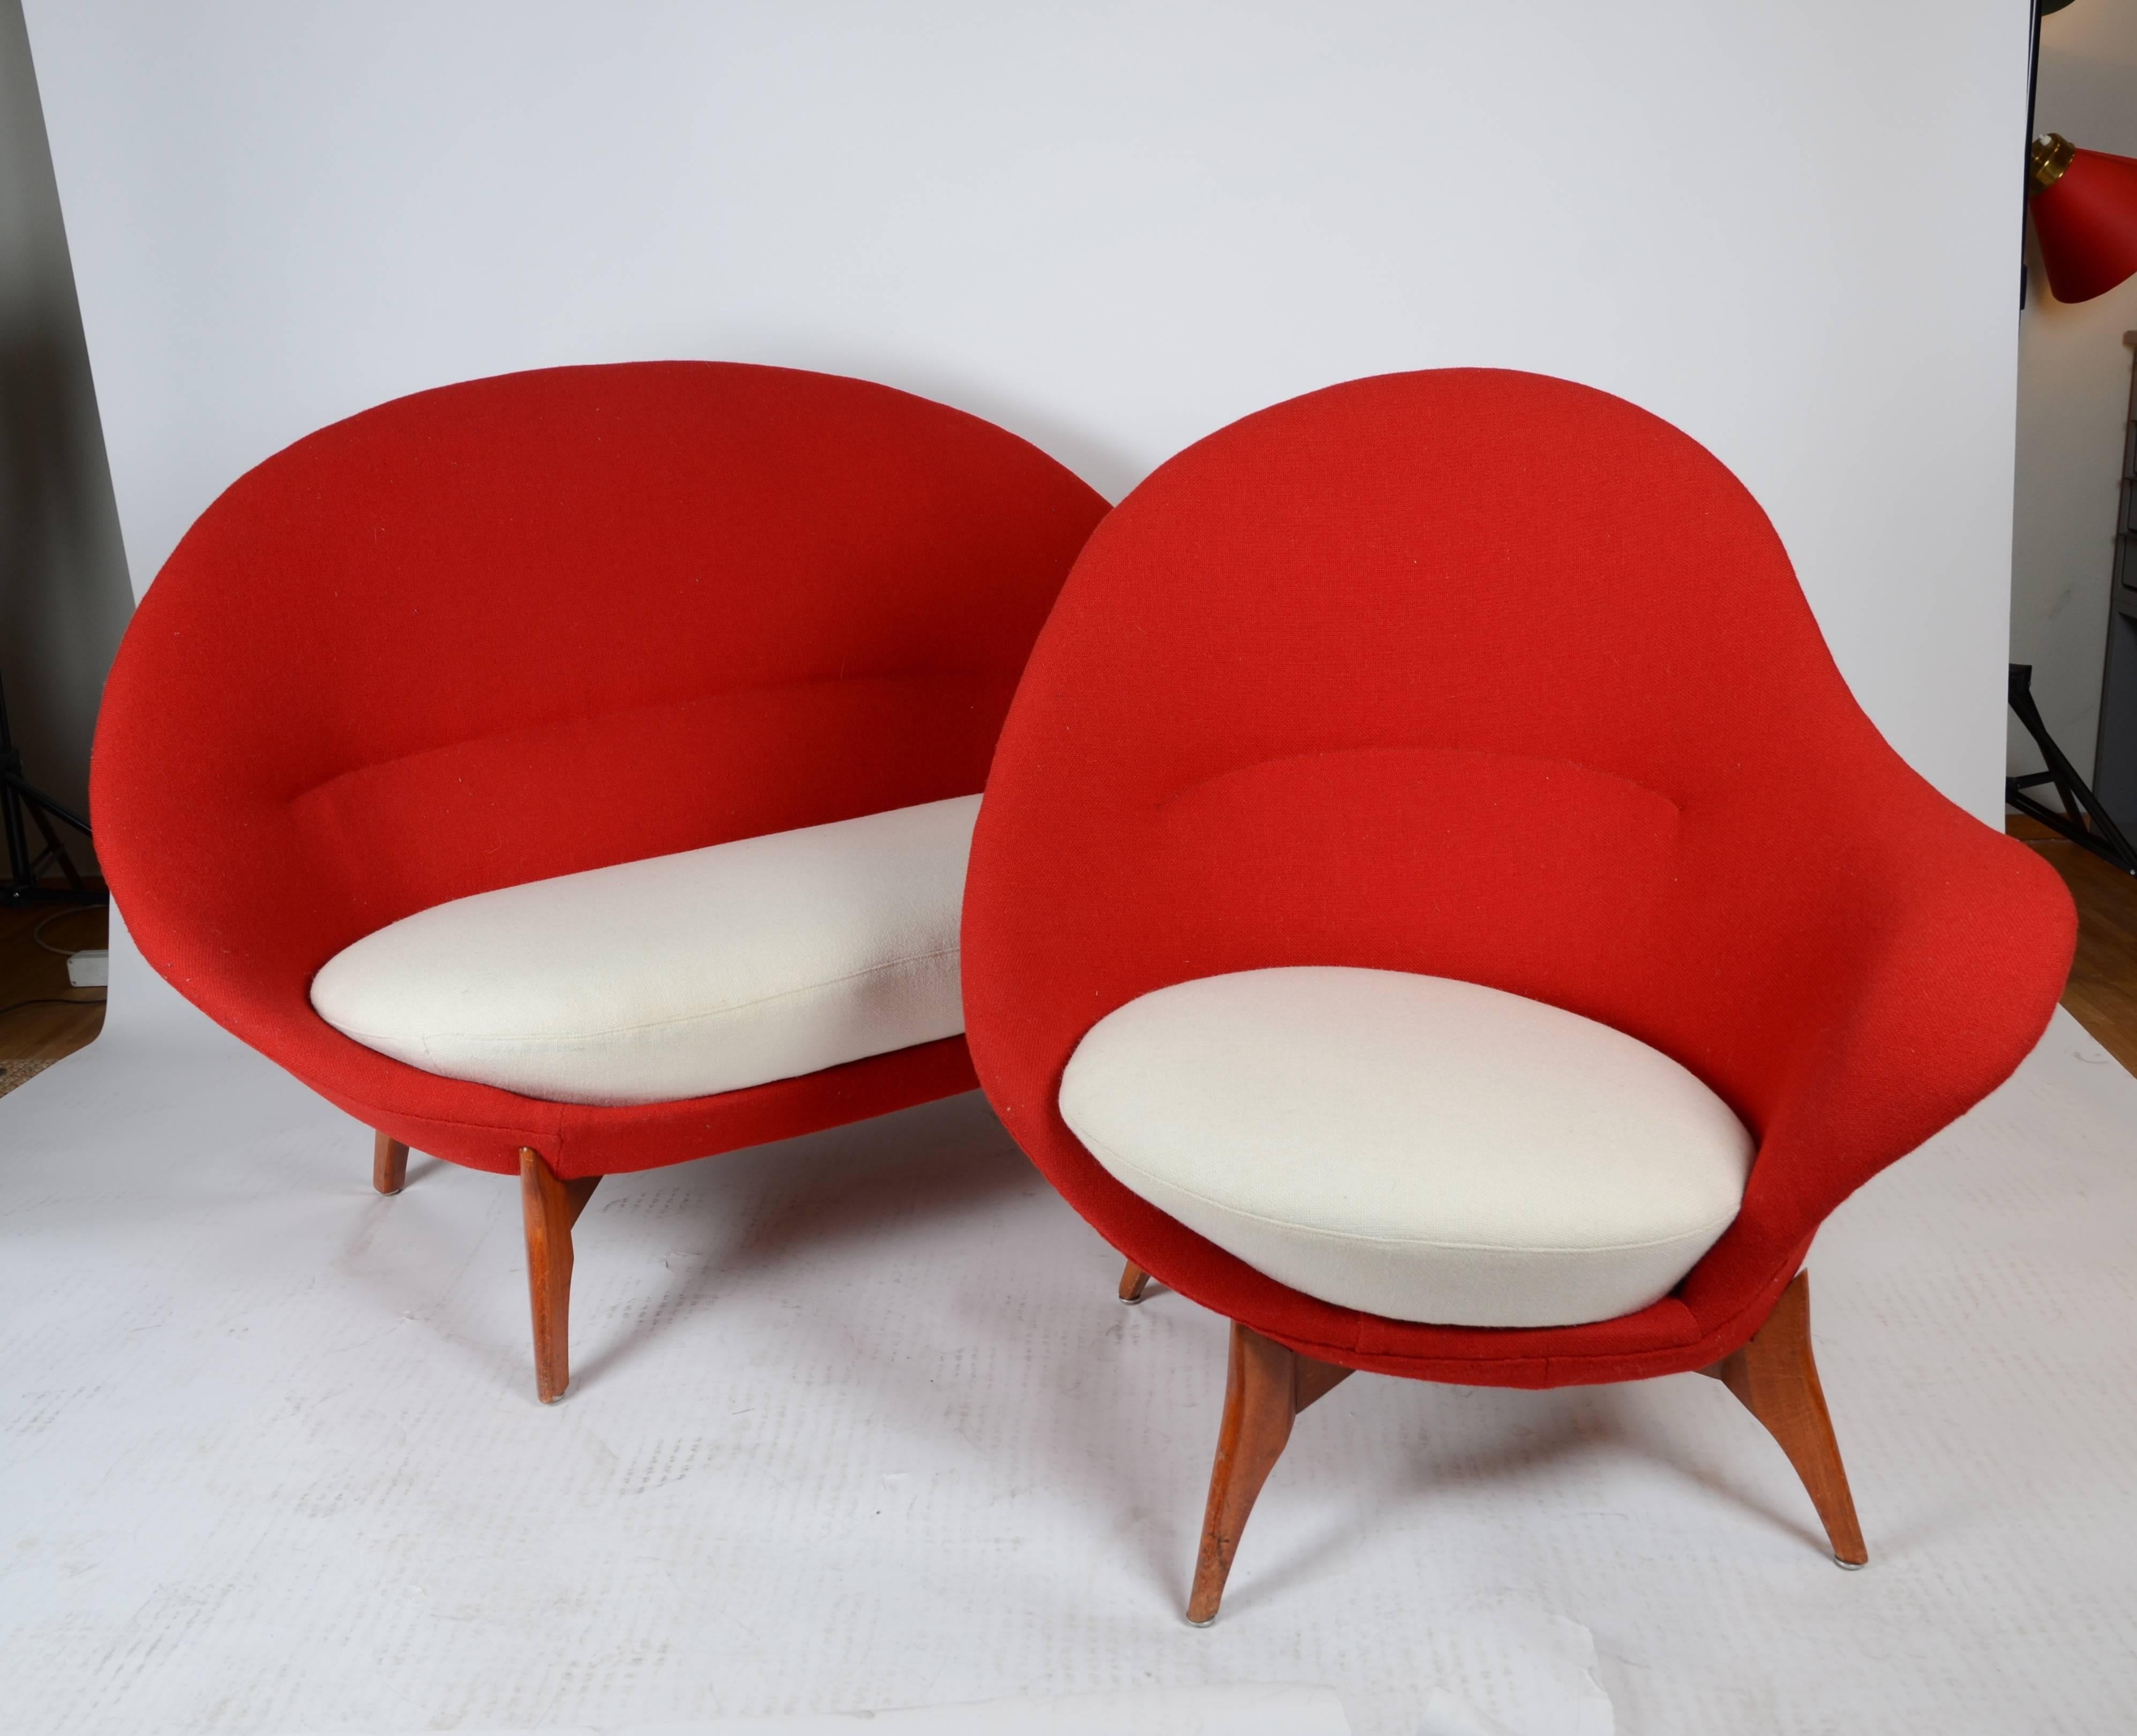 A sofa and lounge chairs, Danish design, mid-1900s. Reupholstered in wool fabric.